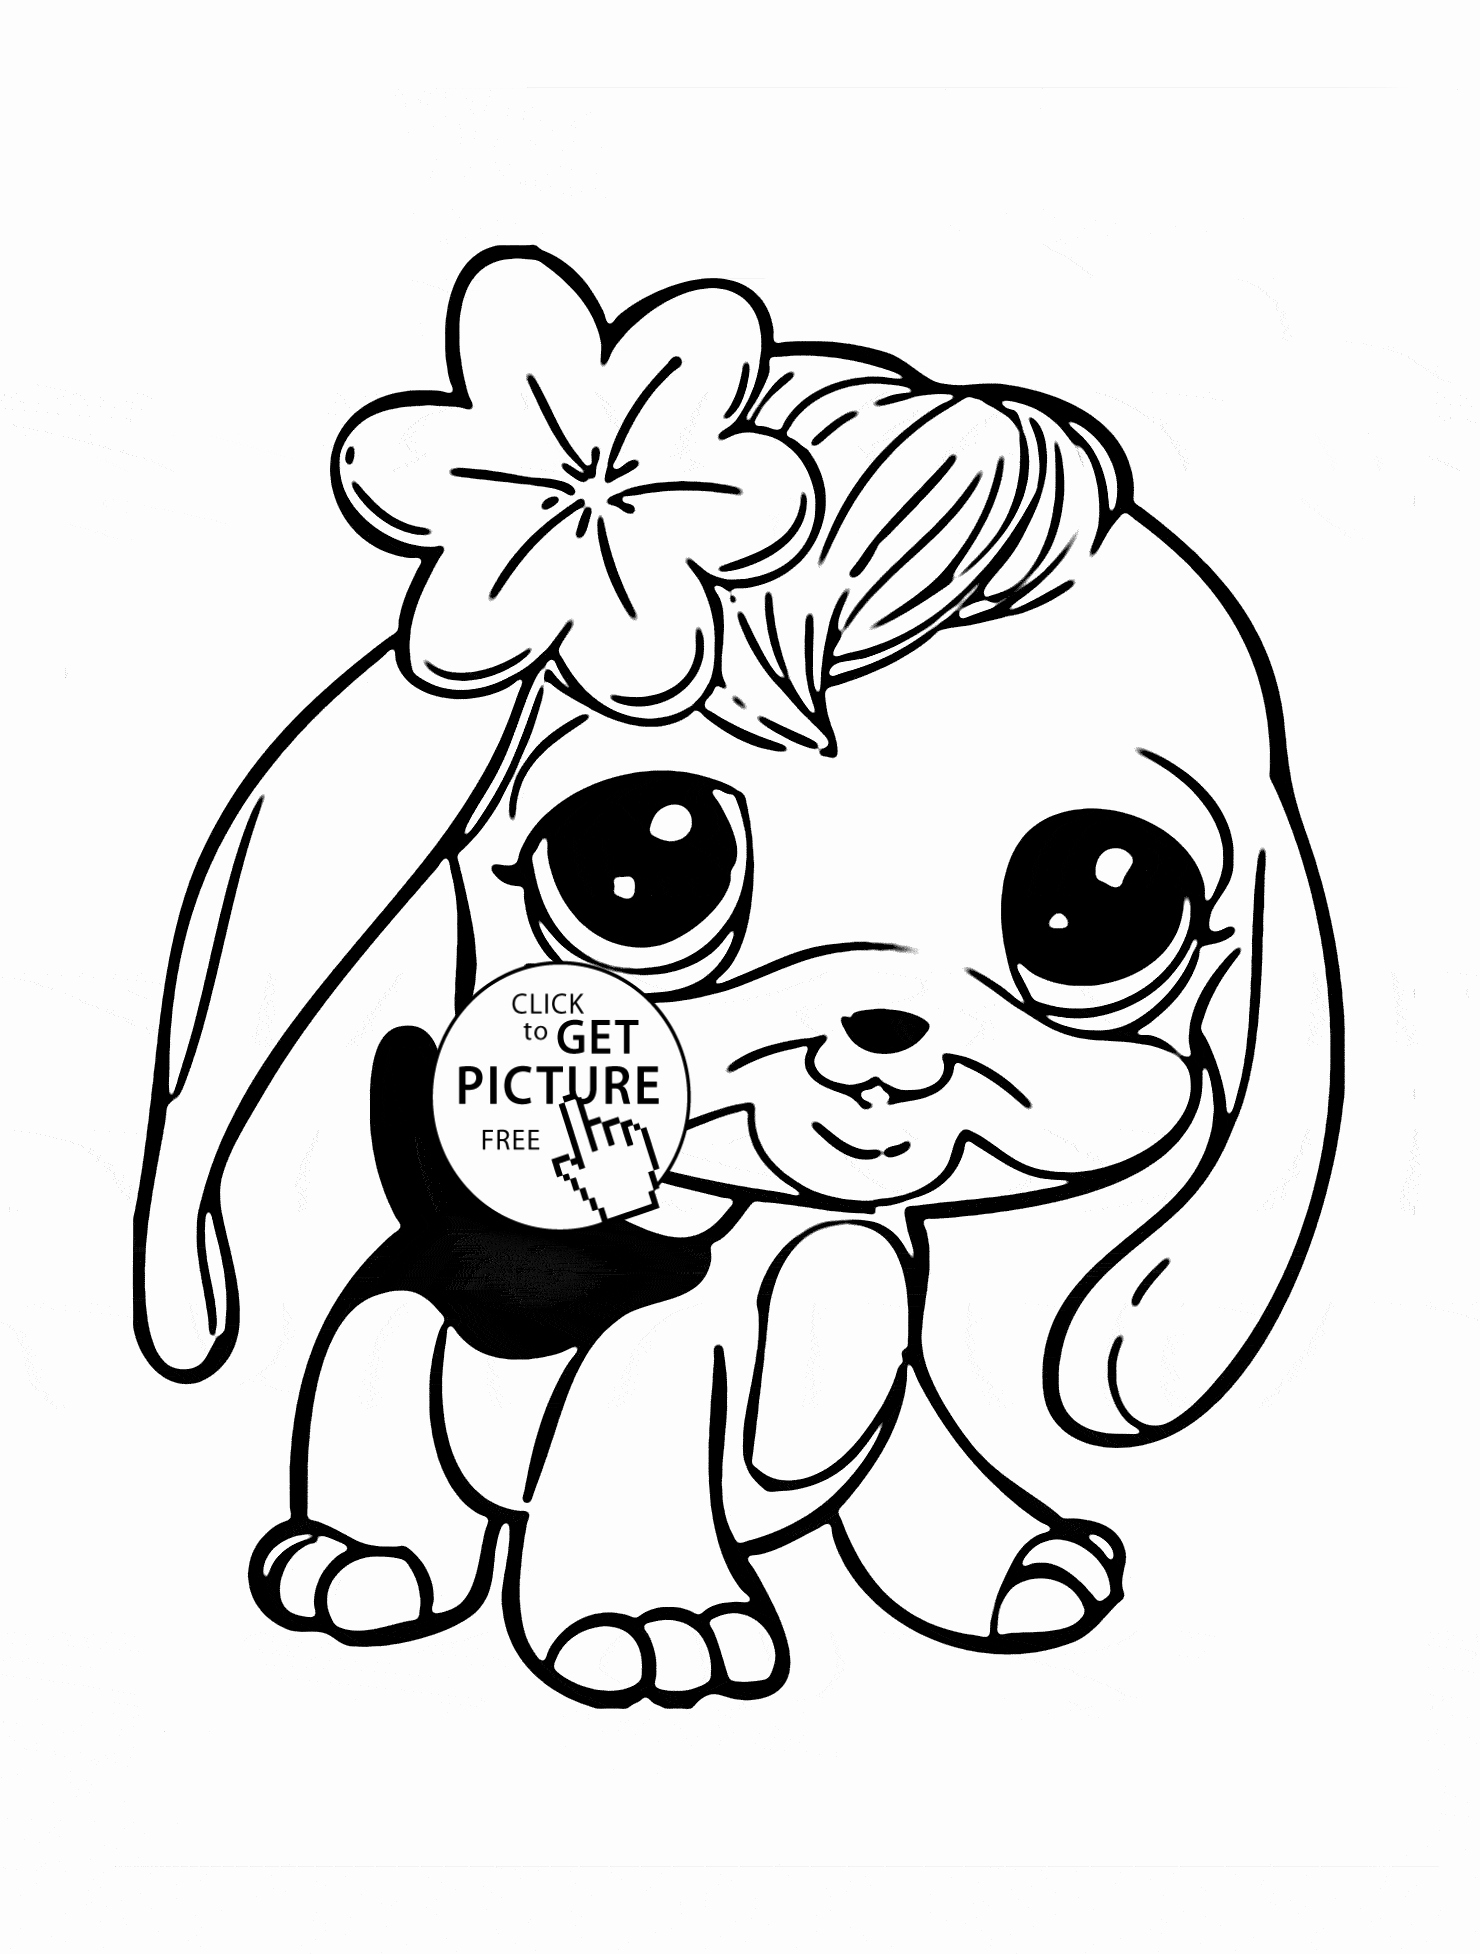 Beanie Boo Coloring Pages Only at GetColorings.com | Free printable ...